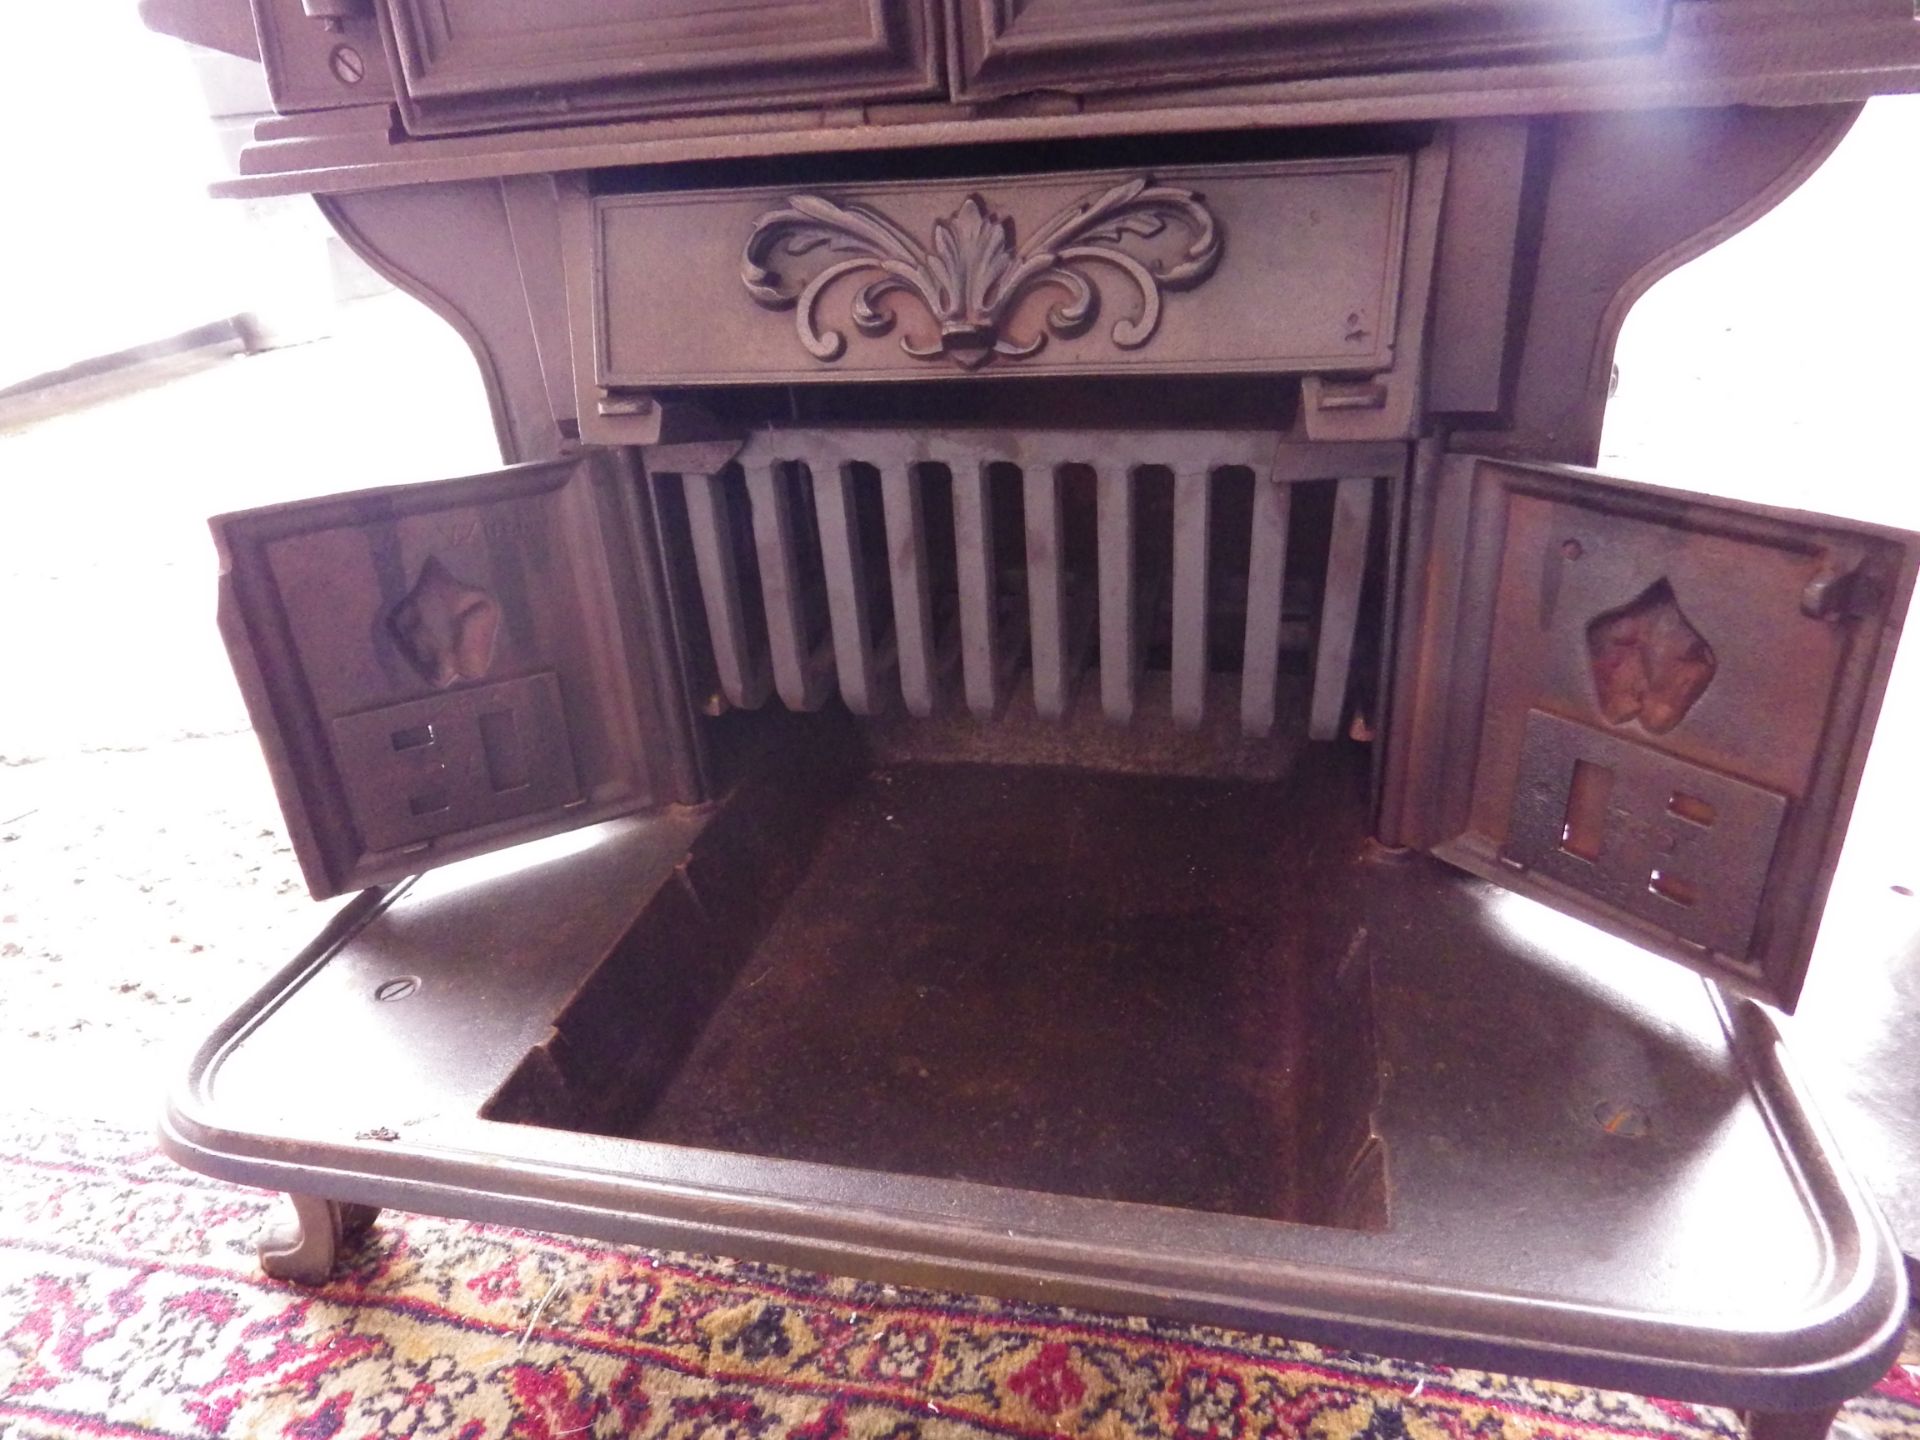 The Wee Ben tailors cast iron laundry stove with ornate door decorations incl two tailor goose irons - Image 7 of 10